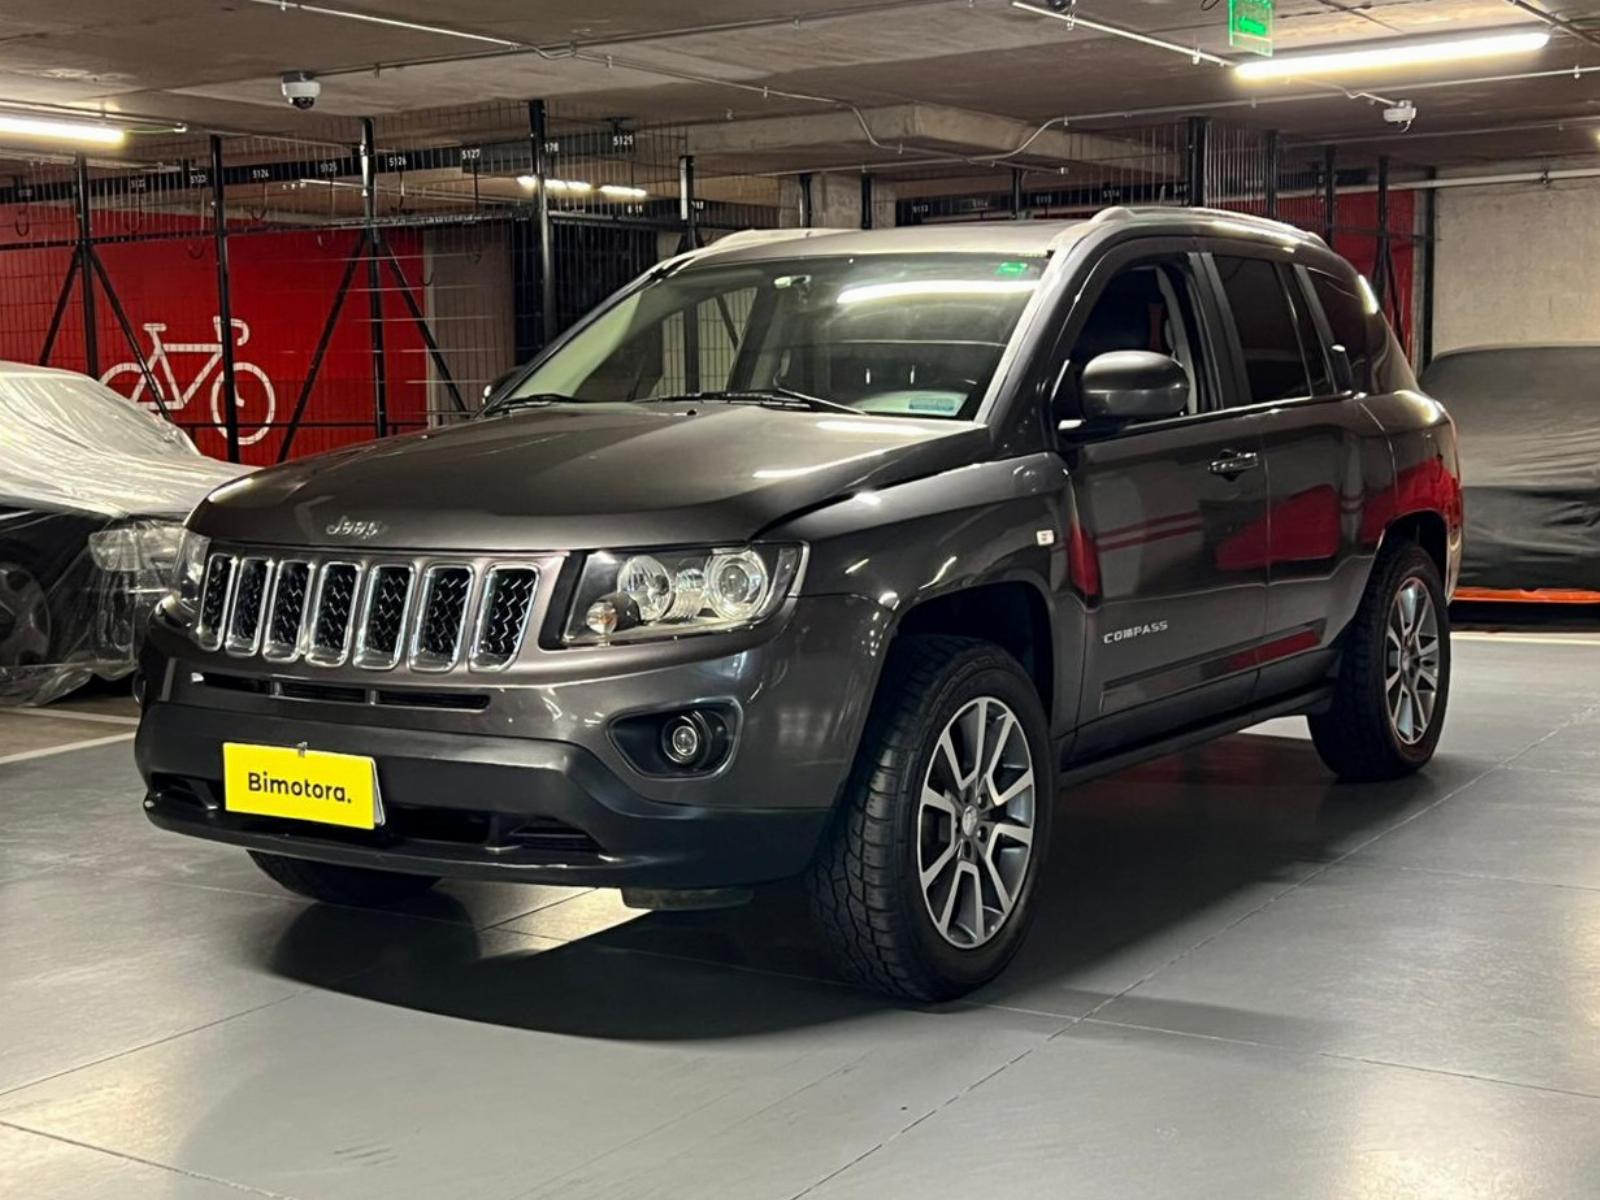 JEEP COMPASS 2015 LIMITED 4x4 - FULL MOTOR